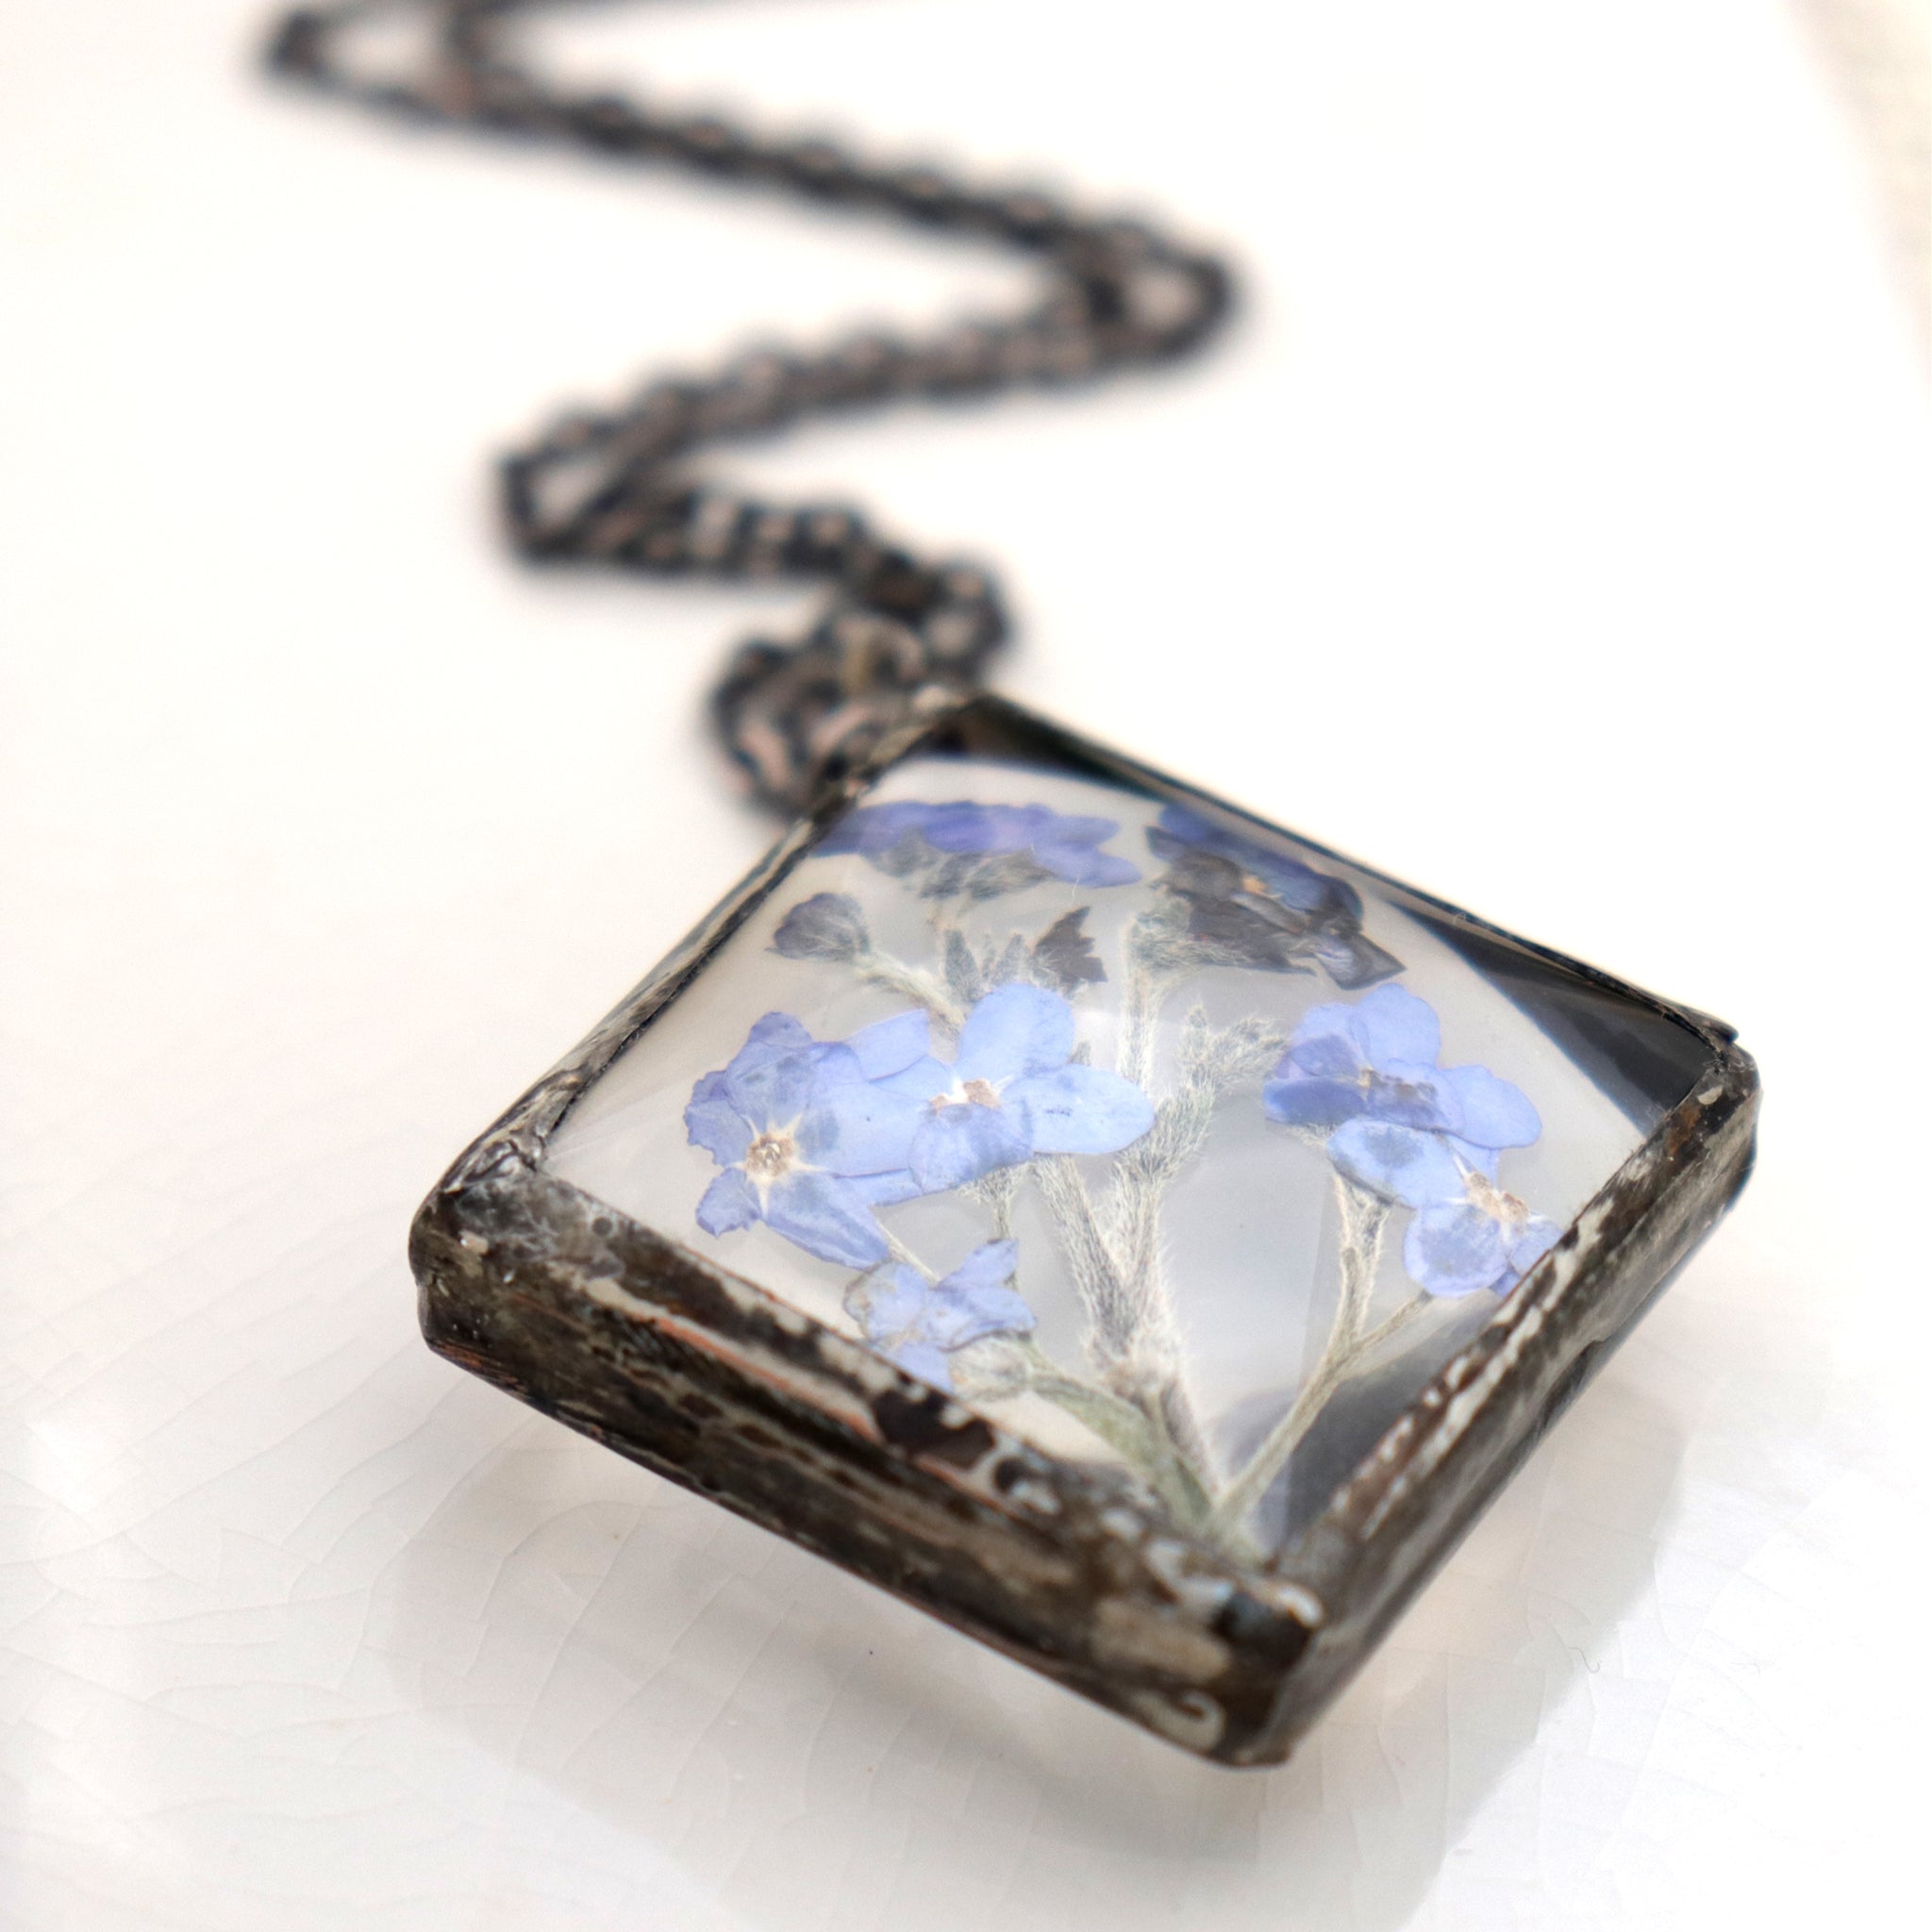 diamond shaped Forget-me-not necklace lying on a white dish